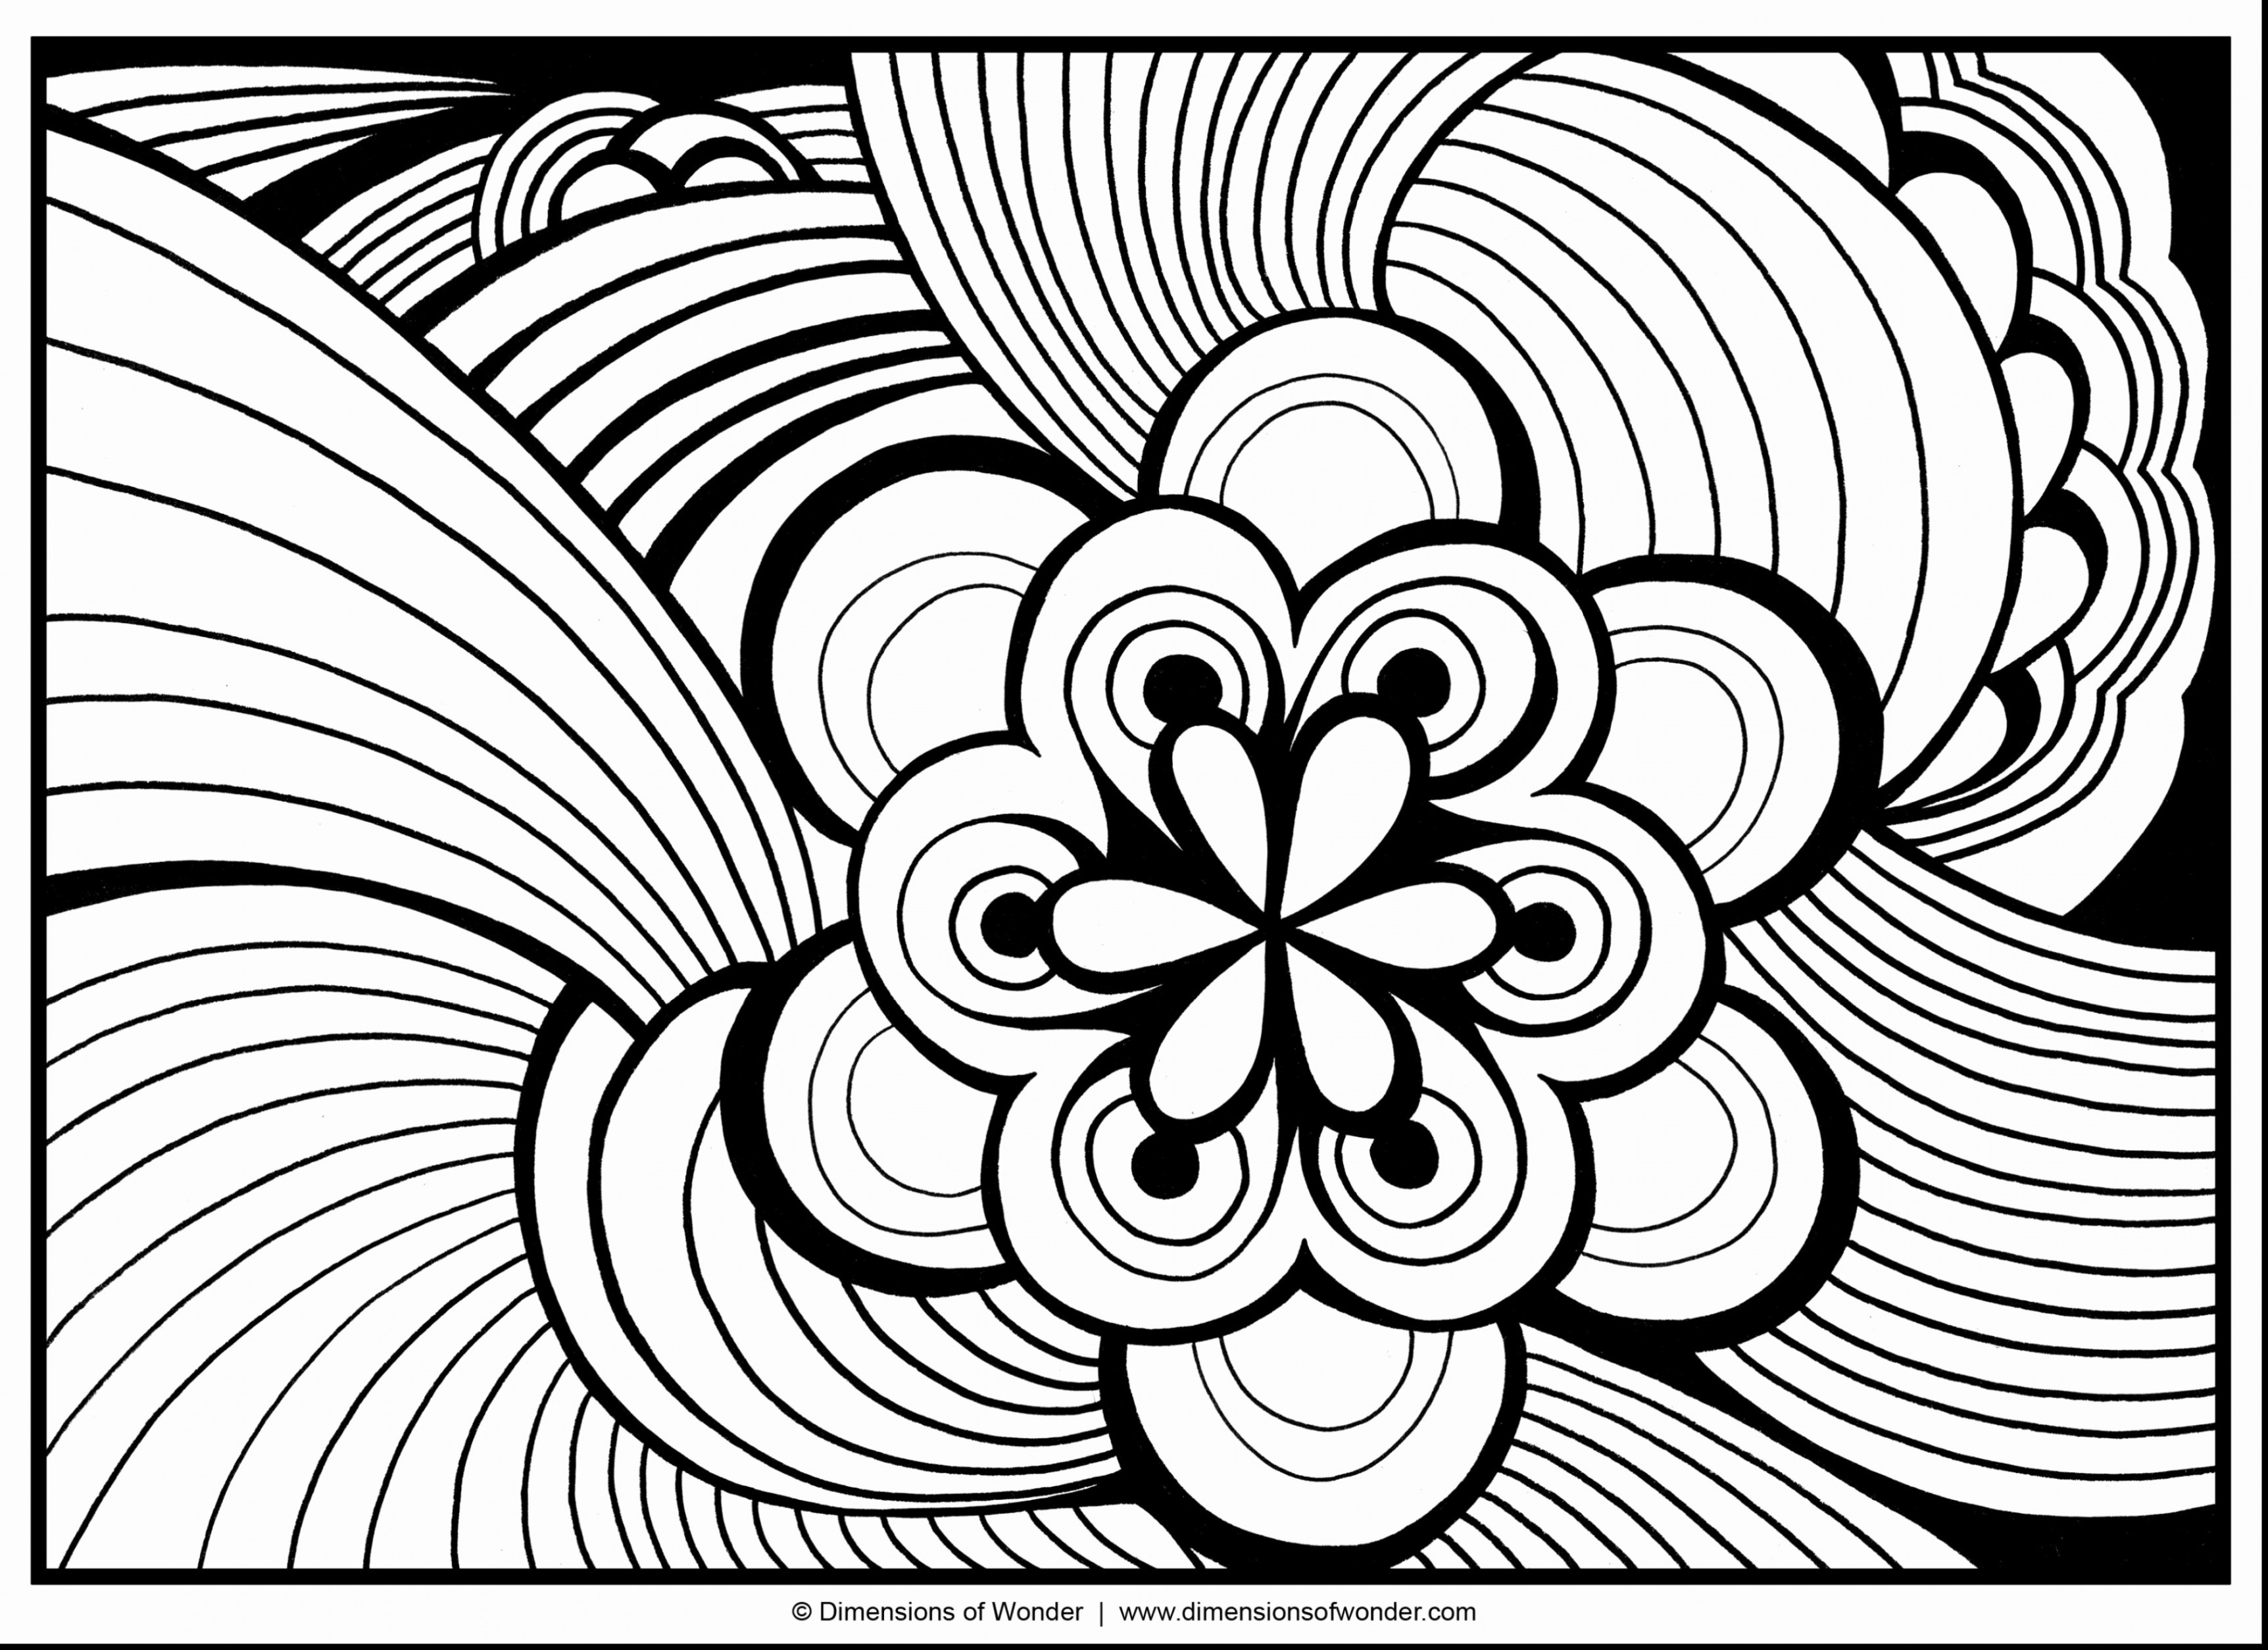 12 Famous Picture Of A Flower Vase to Color 2024 free download picture of a flower vase to color of adult flower coloring pages vases flower vase coloring page pages with adult flower coloring pages coloring pages flowers and hearts fresh best coloring 